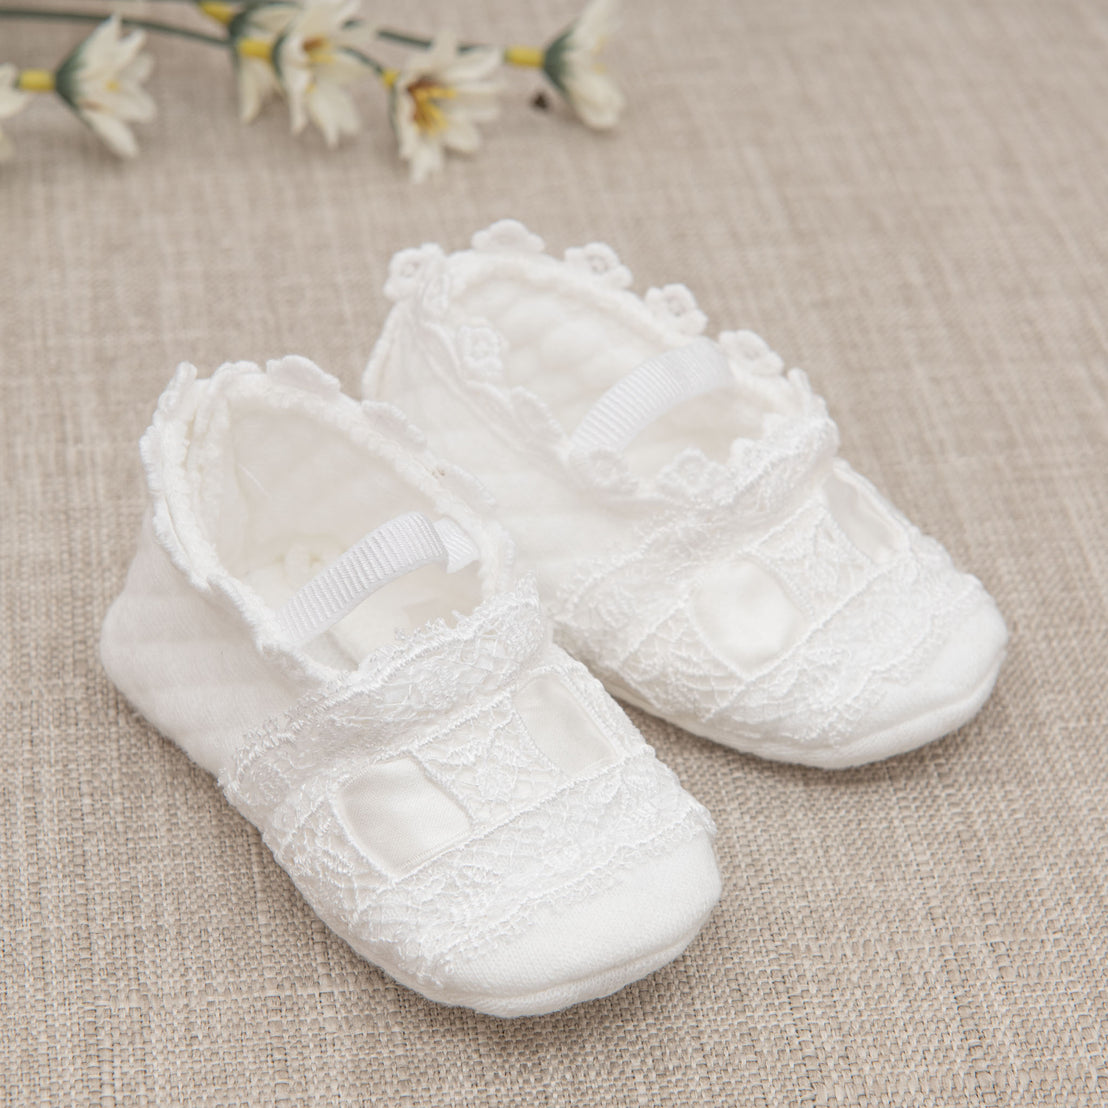 A pair of white lace Mila baby shoes with ribbon detailing, a unique baby gift, sits on a textured beige surface, accompanied by soft-focus white flowers in the background.